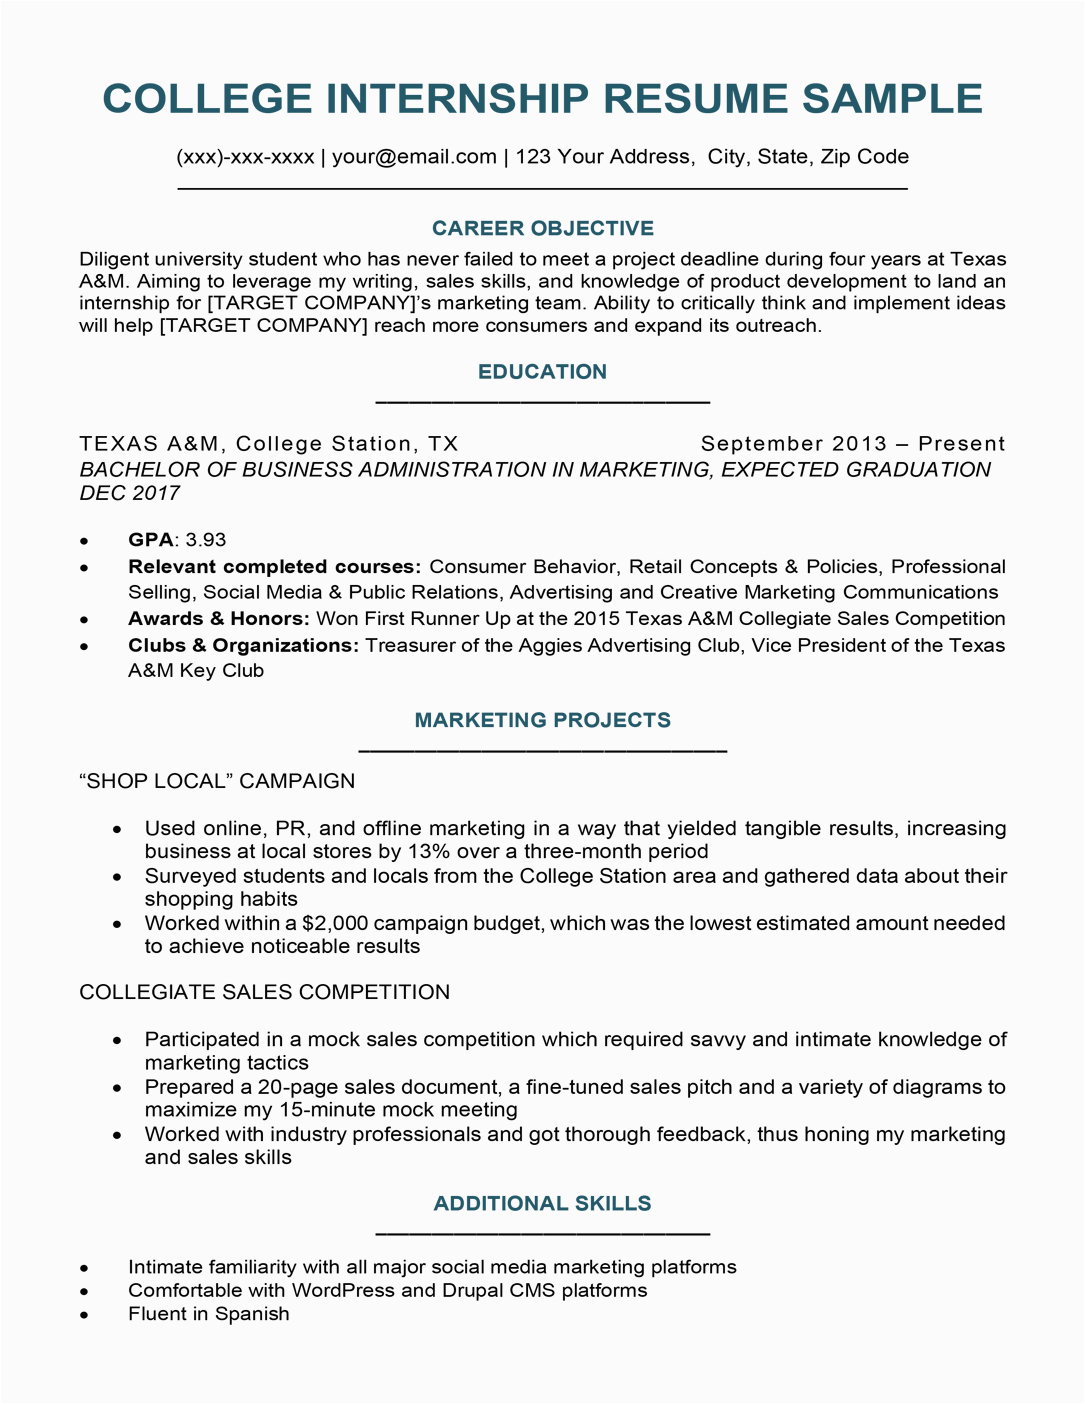 Sample Phrases and Suggestions for Resumes College Student Resume Sample & Writing Tips